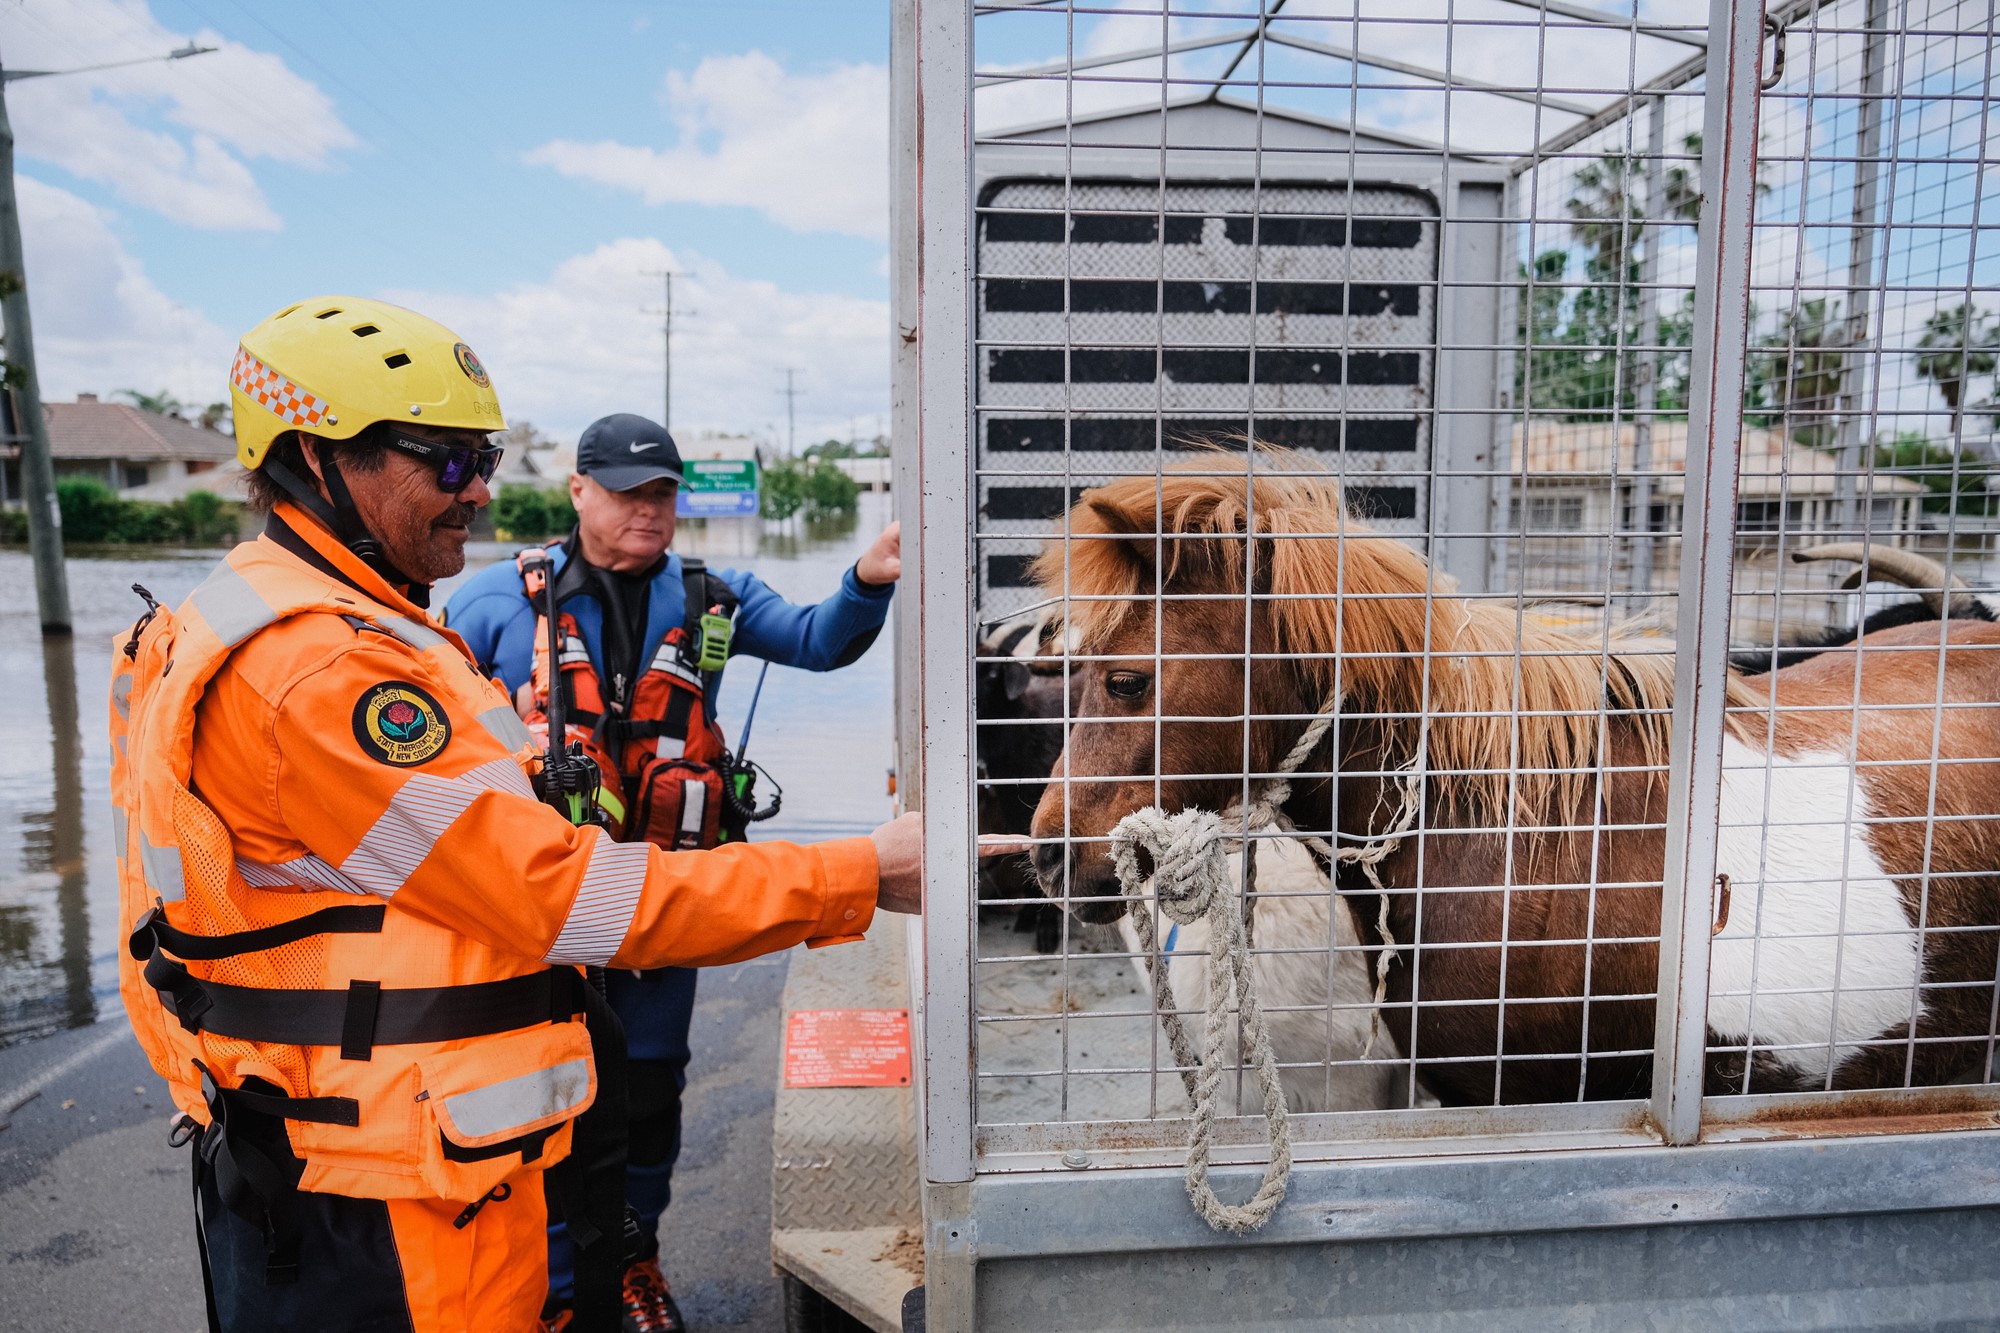 An SES volunteer pets the nose of the miniature horse on the trailer